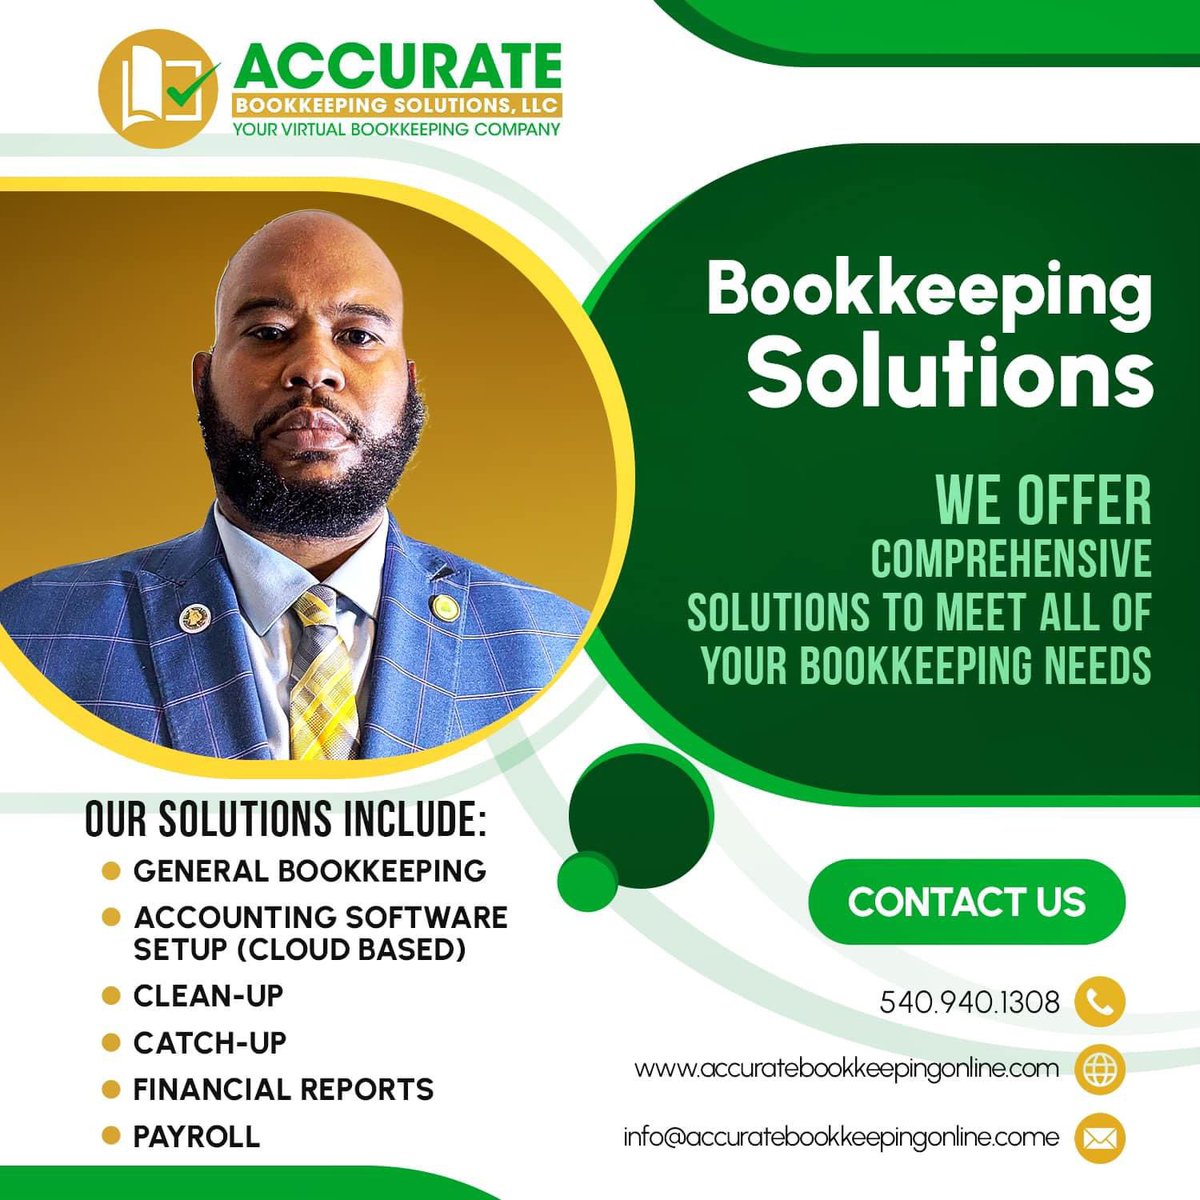 Looking for peace of mind and financial clarity? Look no further! Hiring Accurate Bookkeeping Solutions, LLC. as your bookkeeping partner means precise, organized records, timely reporting, and strategic financial insights tailored to your business needs. #FinancialClarity